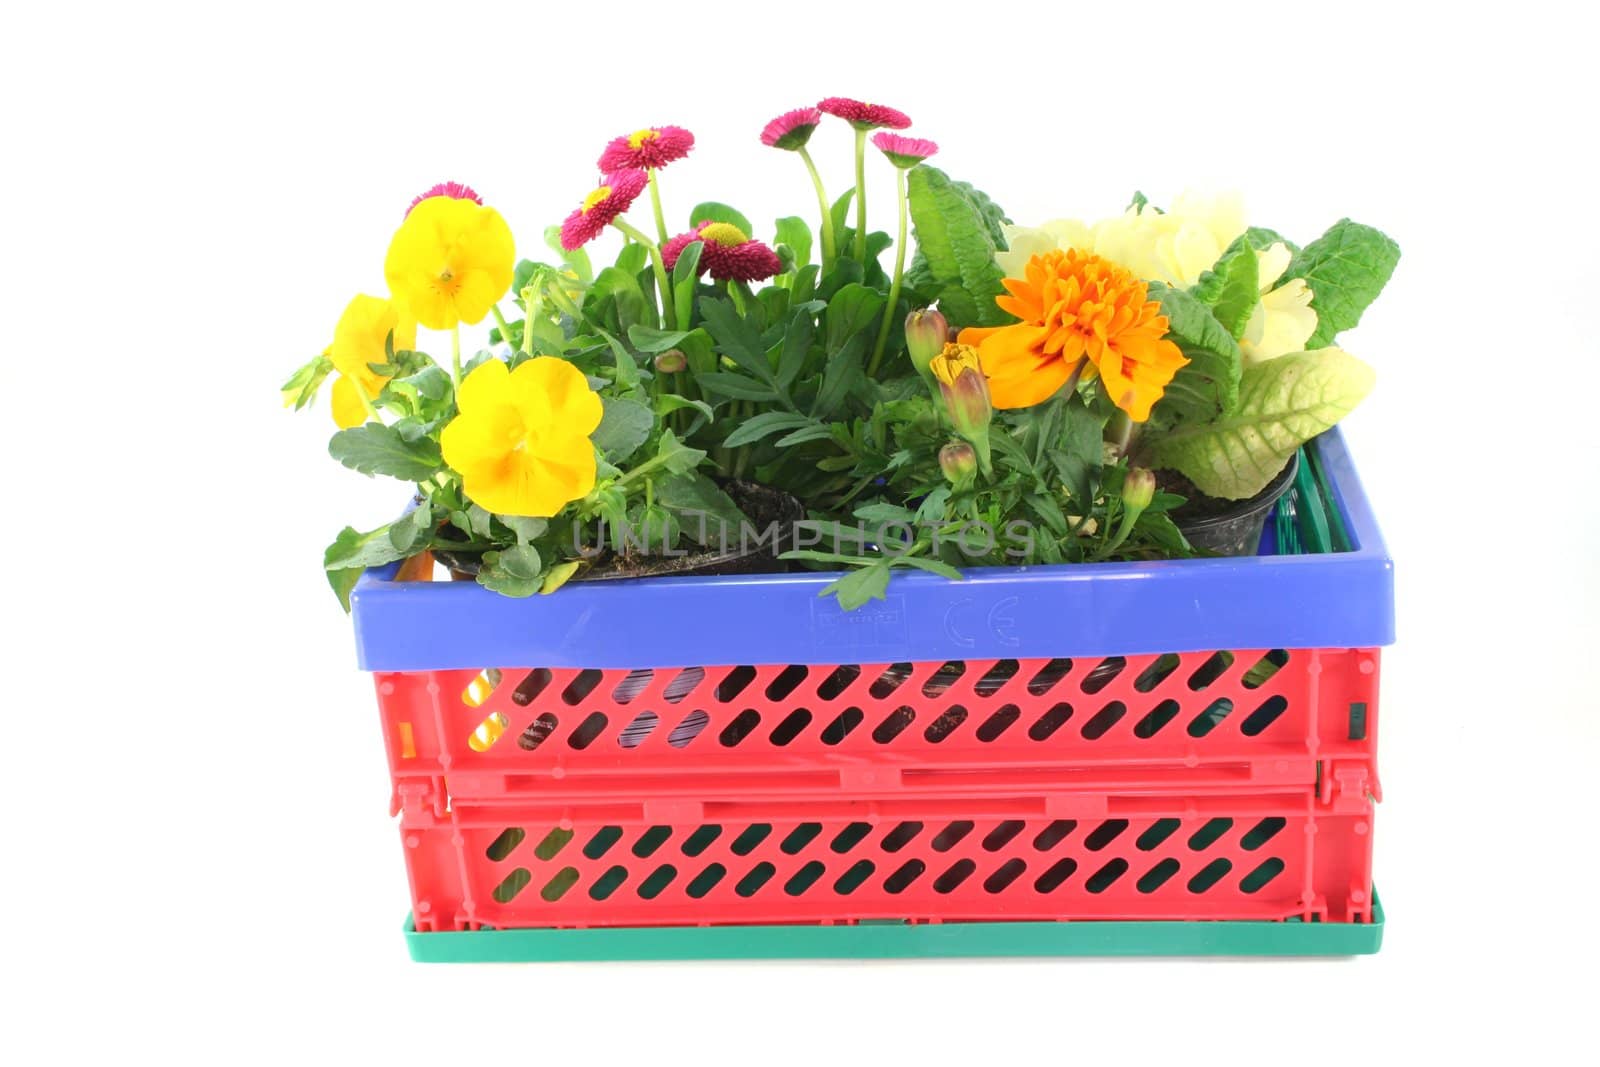 Balcony plants in a folding box by discovery